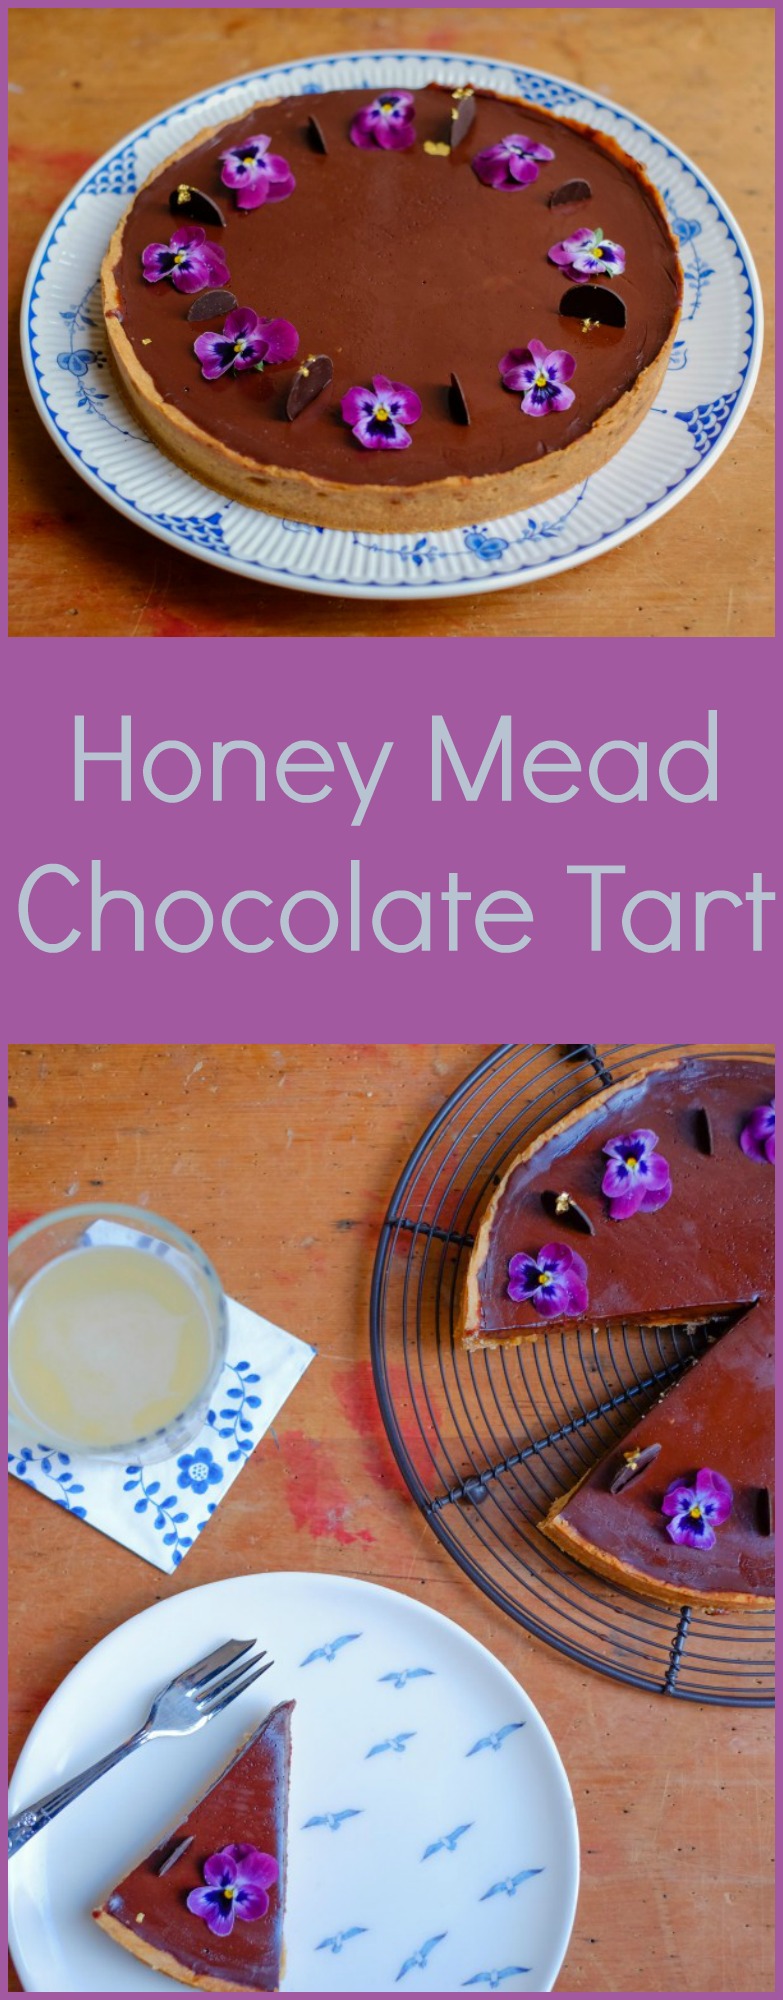 Honey Mead Chocolate Tart | Patisserie Makes Perfect